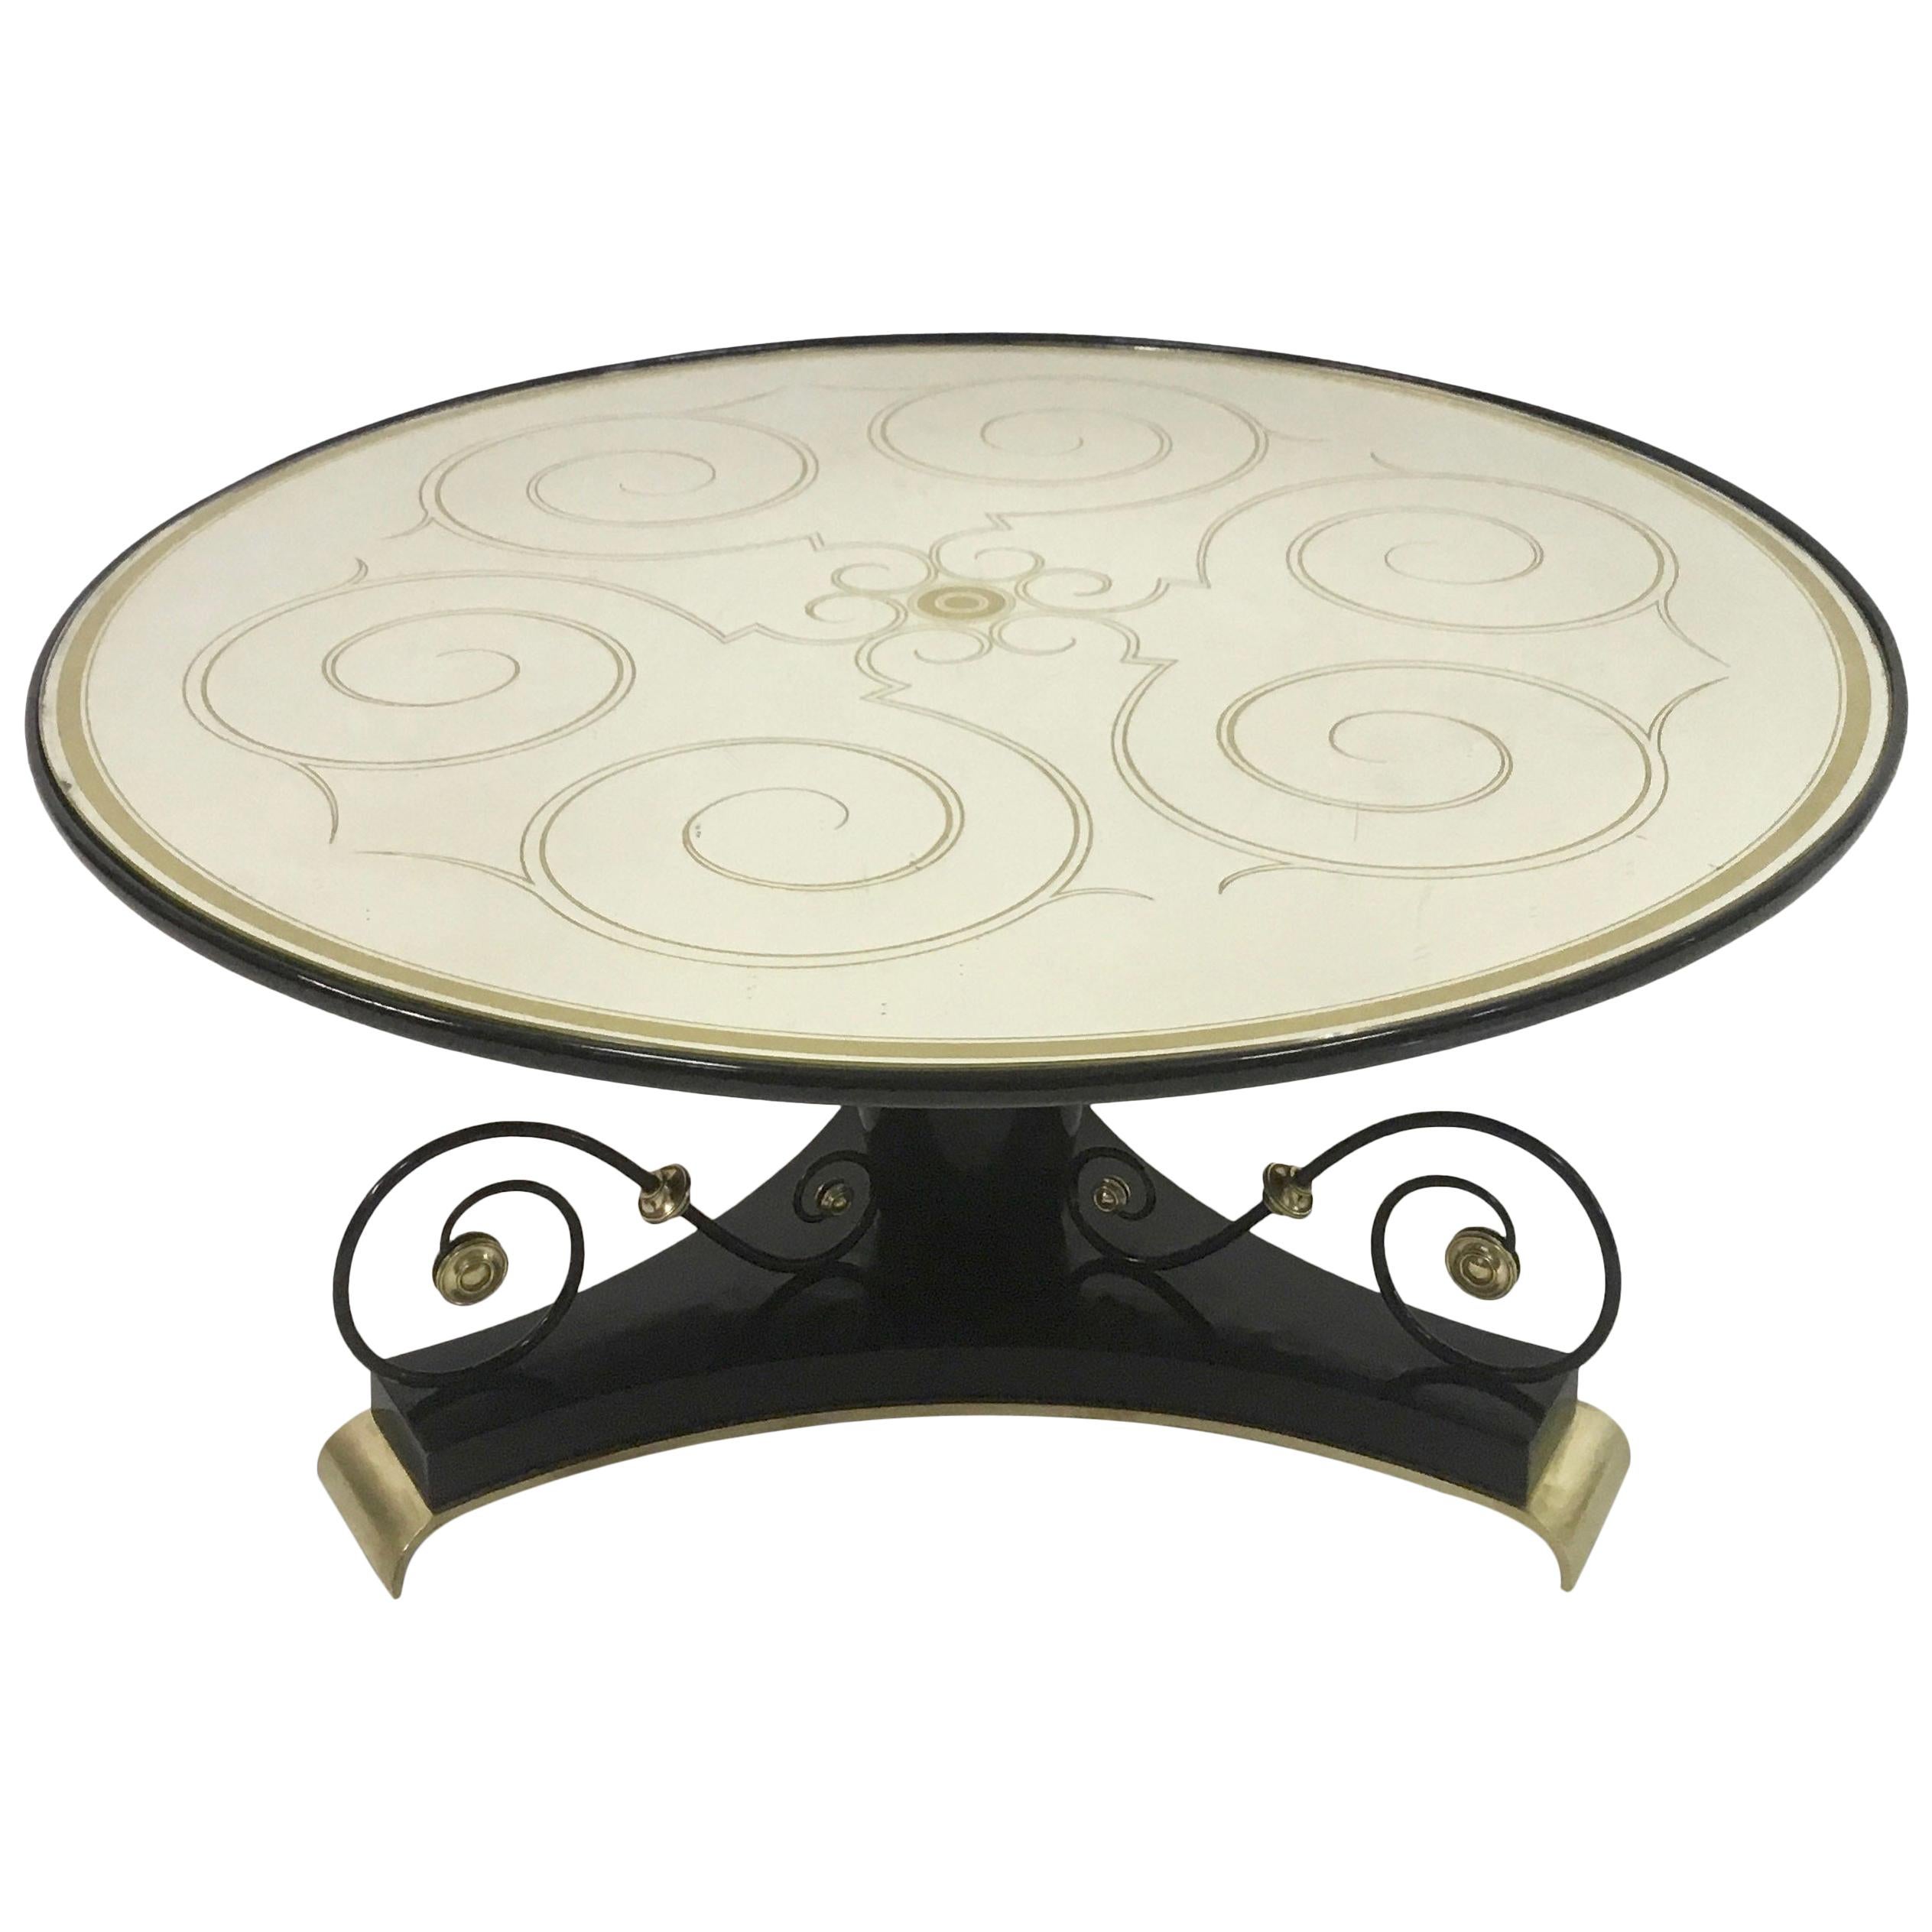 French 1940s Black Lacquered Guéridon with Verre Églomisé Mirror Top For Sale